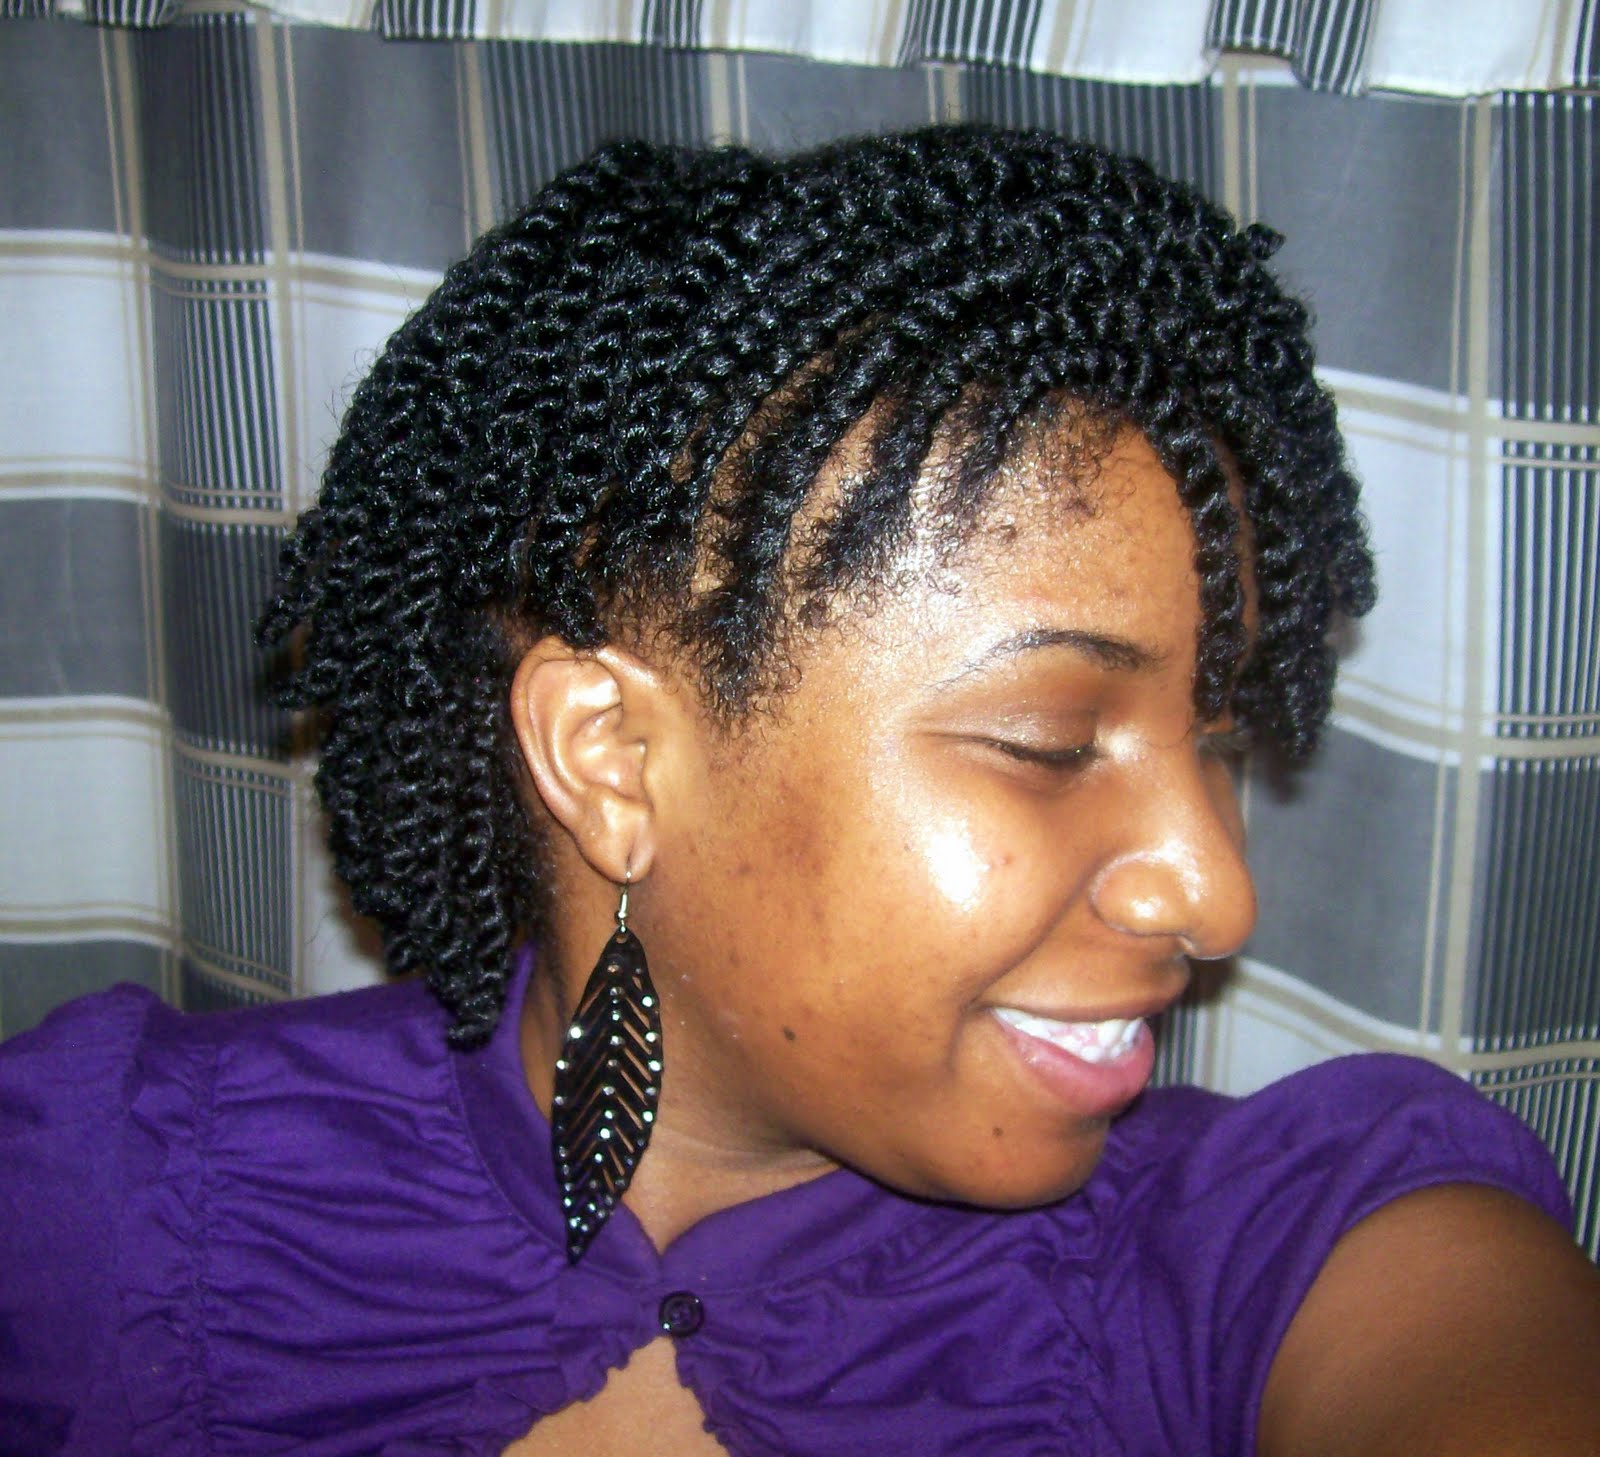 FroStoppa: Ms-gg's natural hair journey and natural hair ...